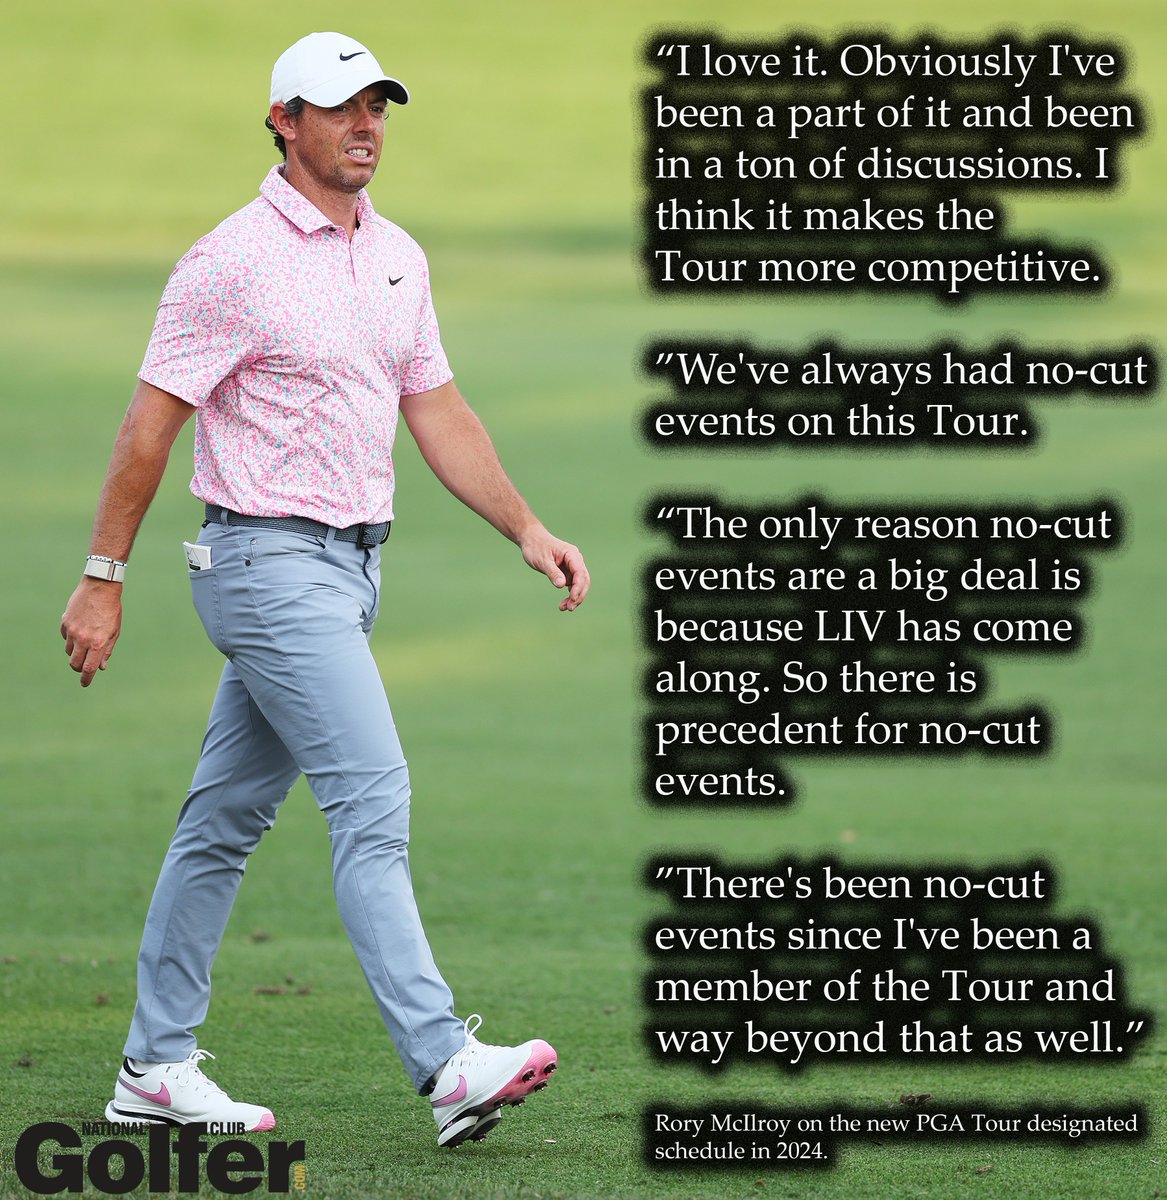 National Club Golfer on Twitter: "What did you make of Rory McIlroy's